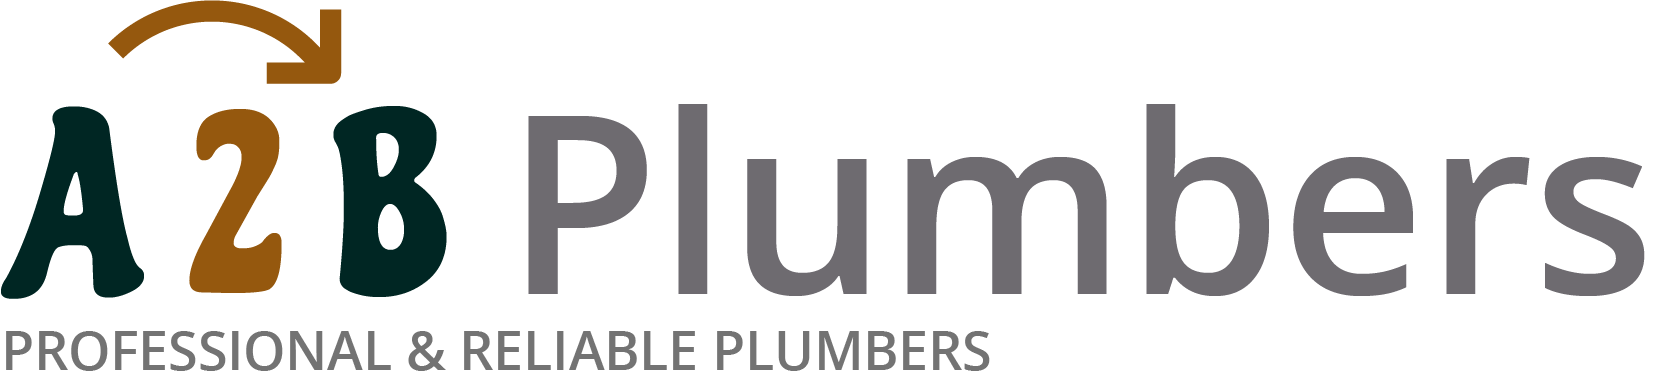 If you need a boiler installed, a radiator repaired or a leaking tap fixed, call us now - we provide services for properties in Lymm and the local area.